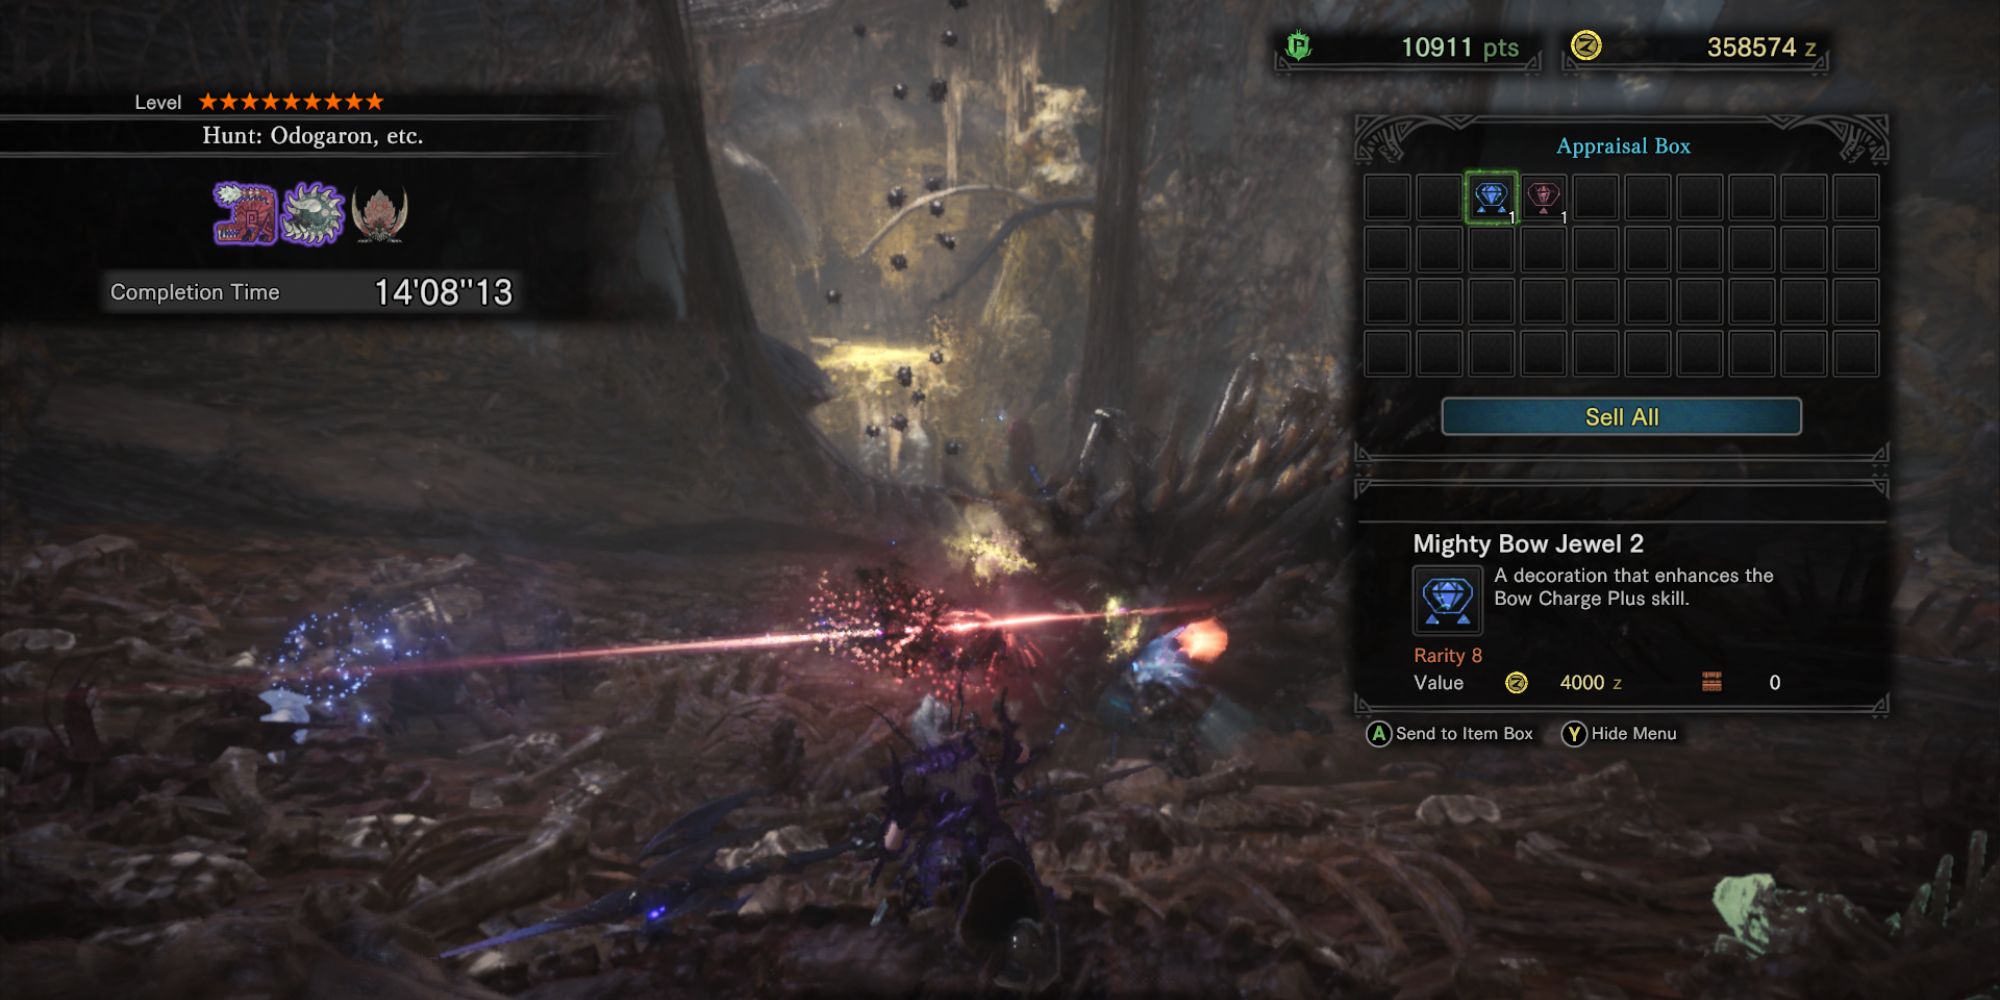 Mighty Bow Jewel 2 in the MHW appraisal box